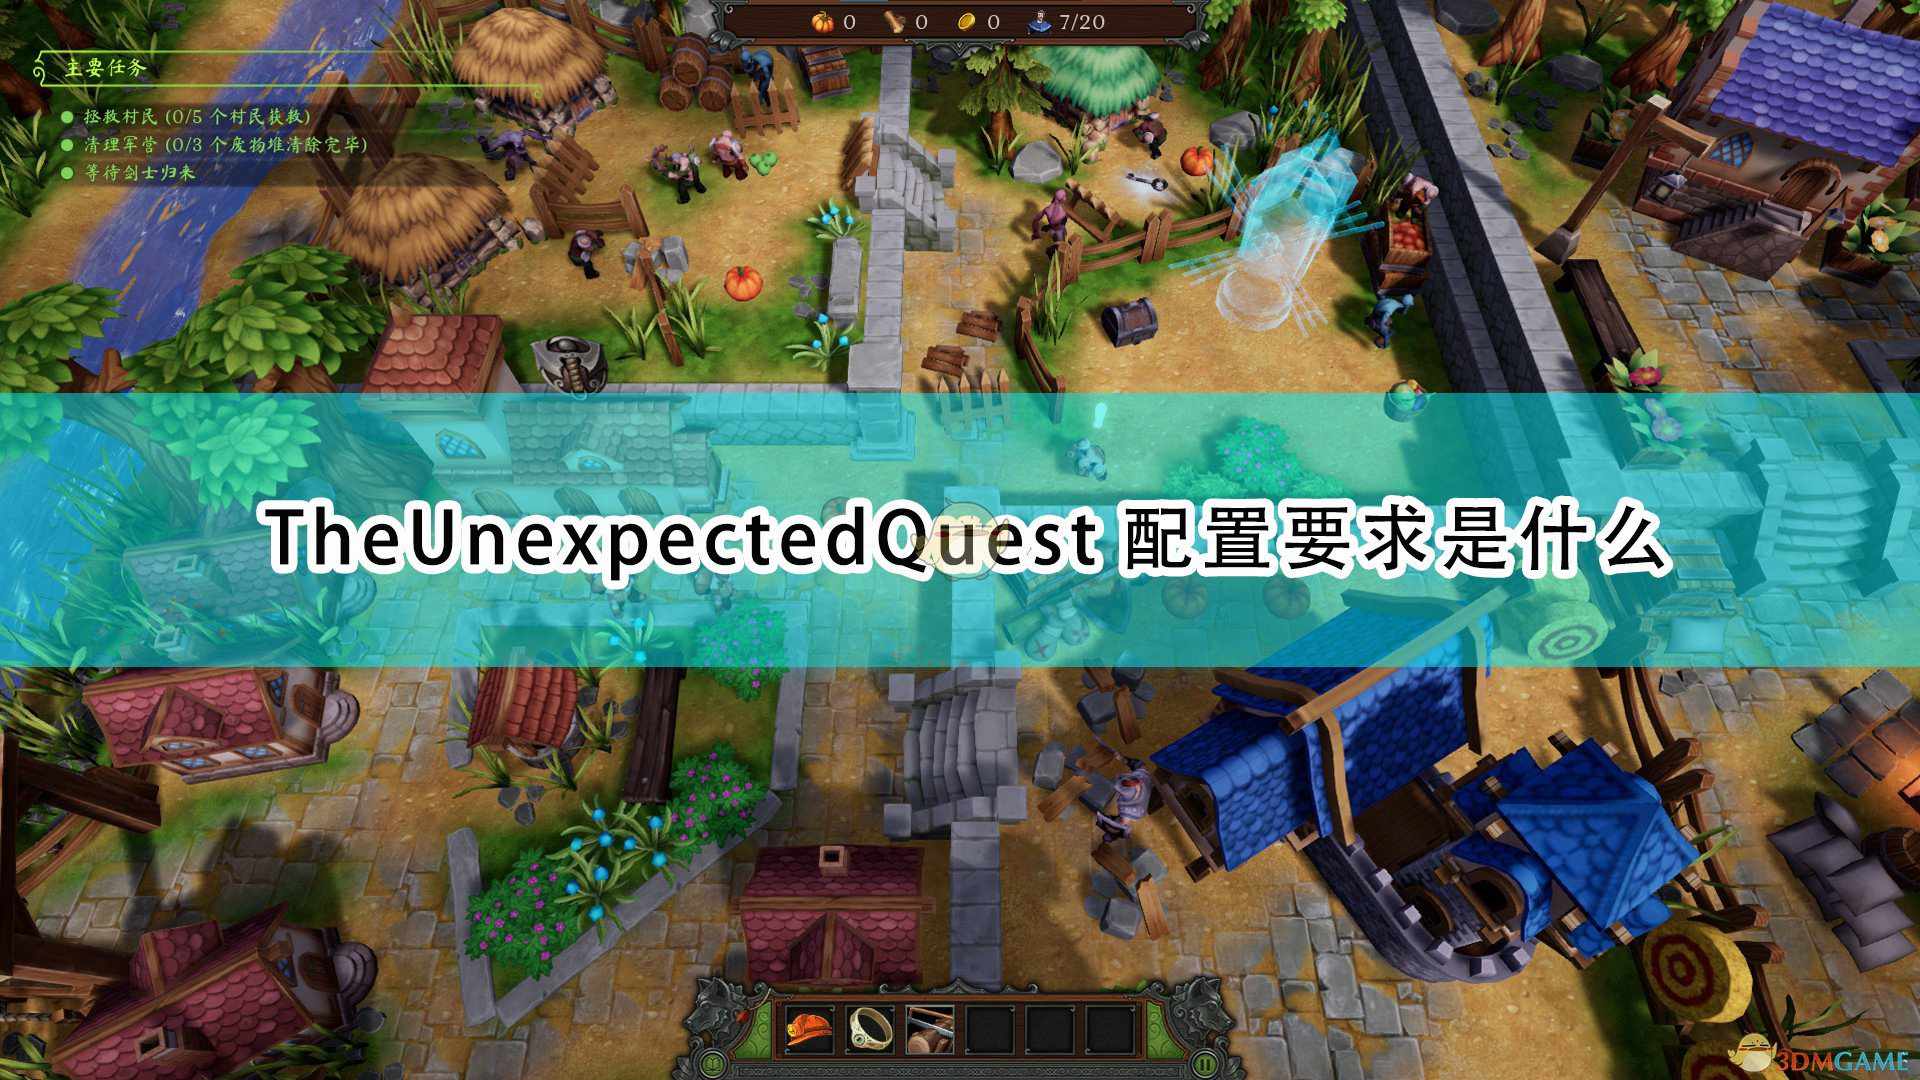 《The Unexpected Quest》配置要求一览表